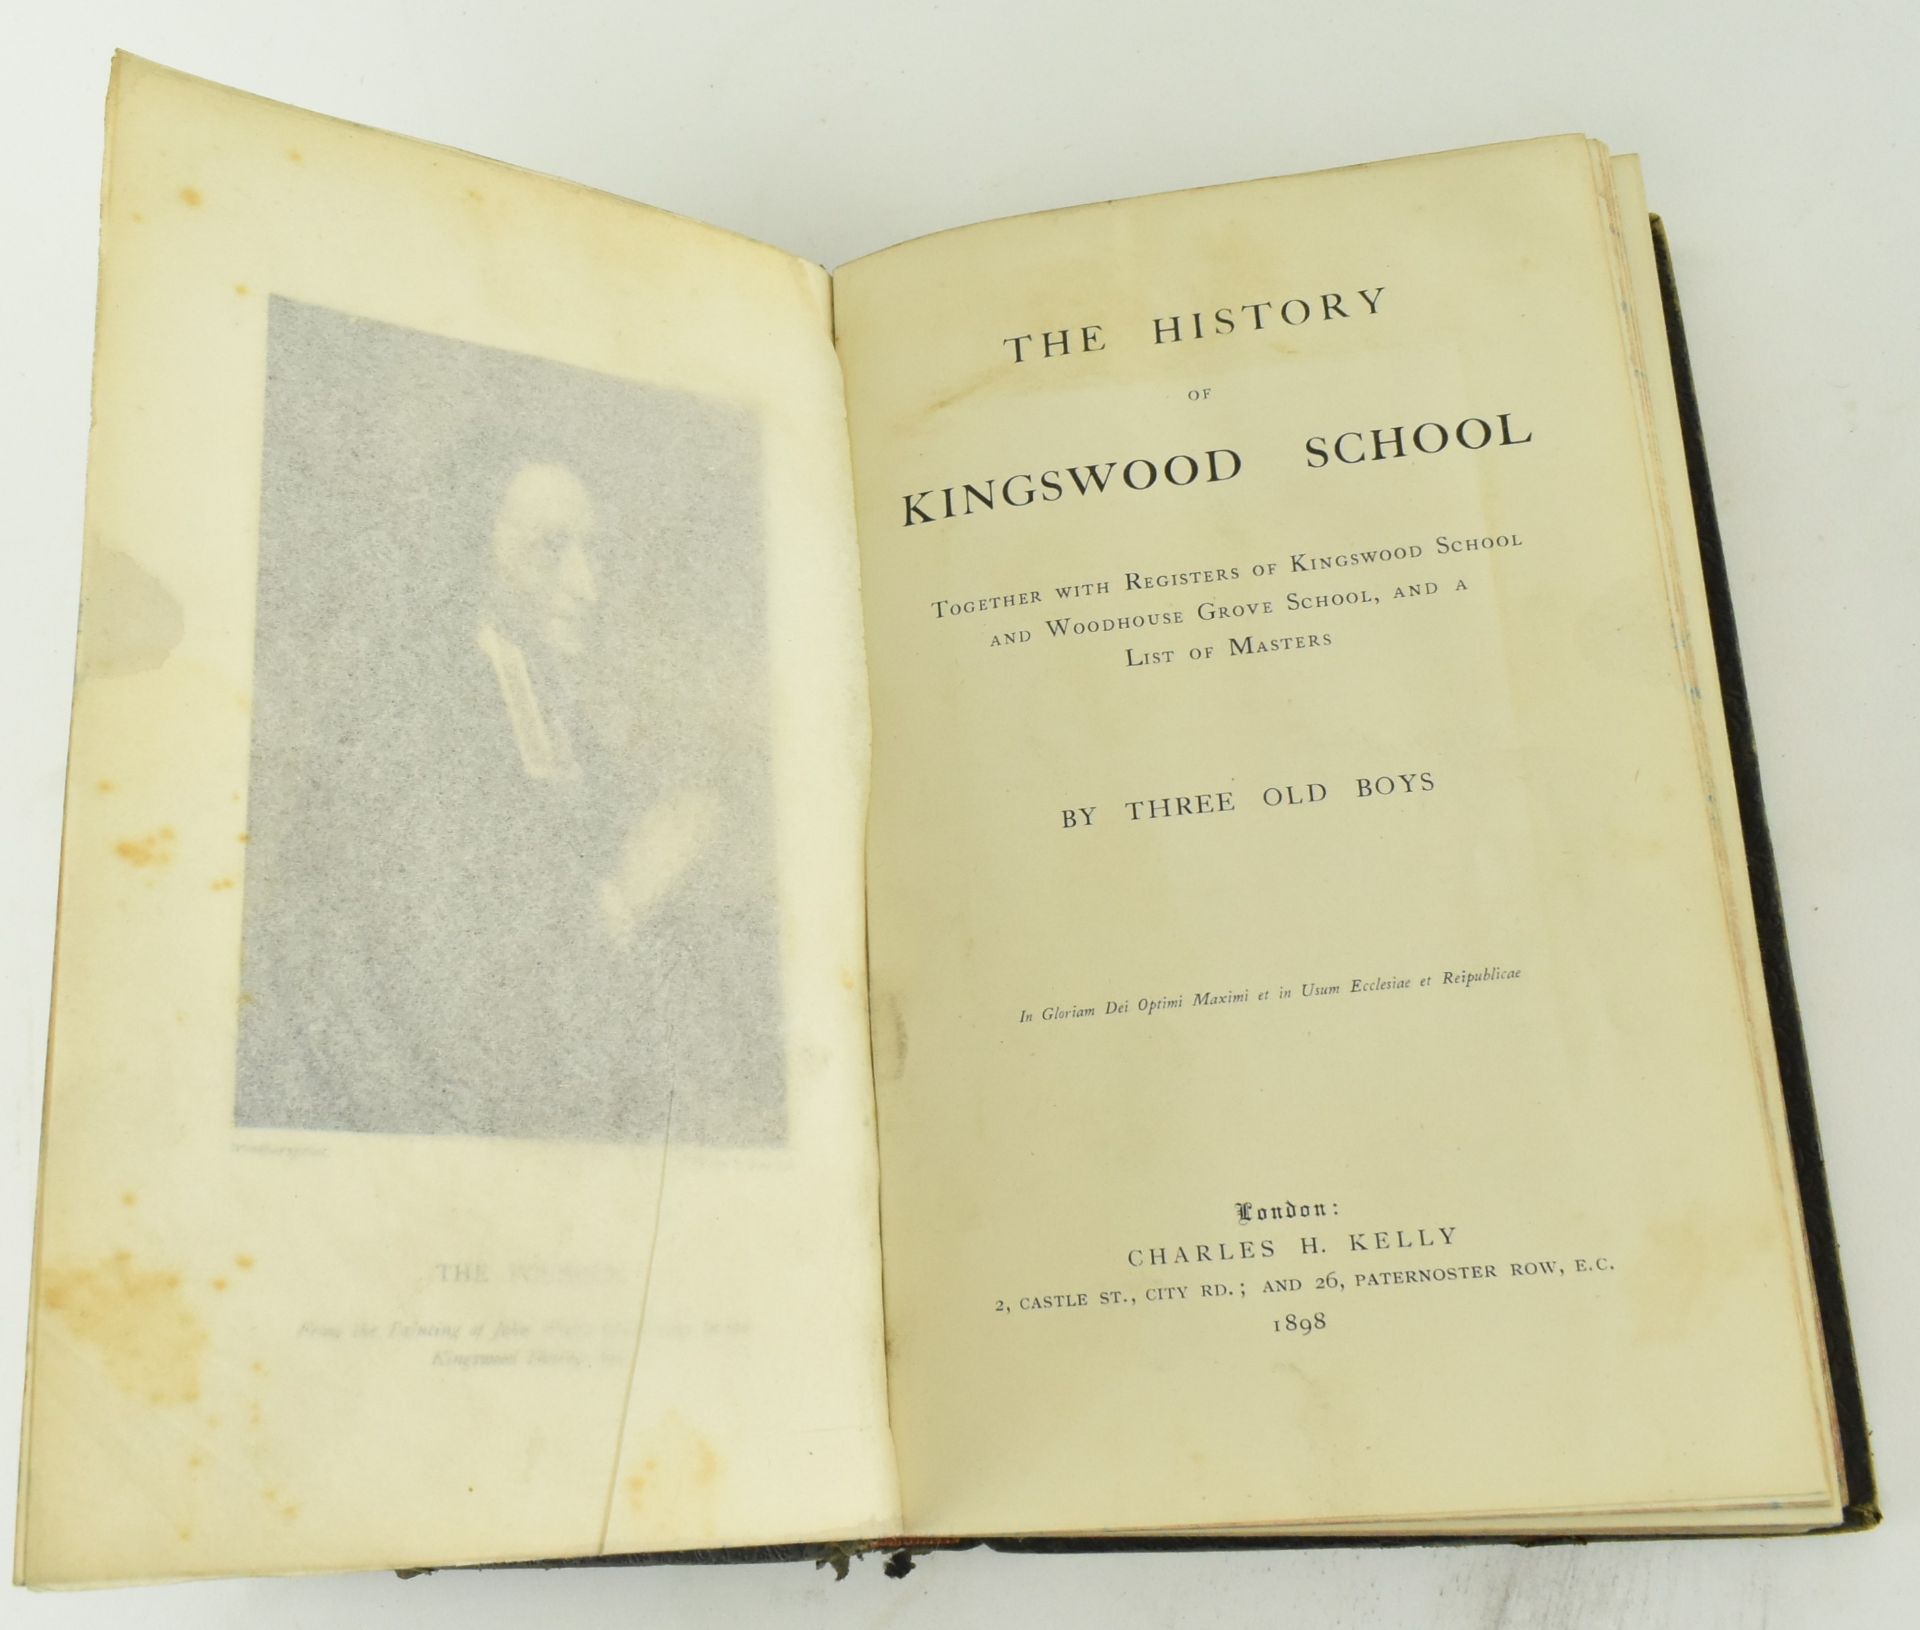 LOCAL BATH INTEREST - FOUR REGISTERS OF KINGSWOOD SCHOOL - Image 5 of 8